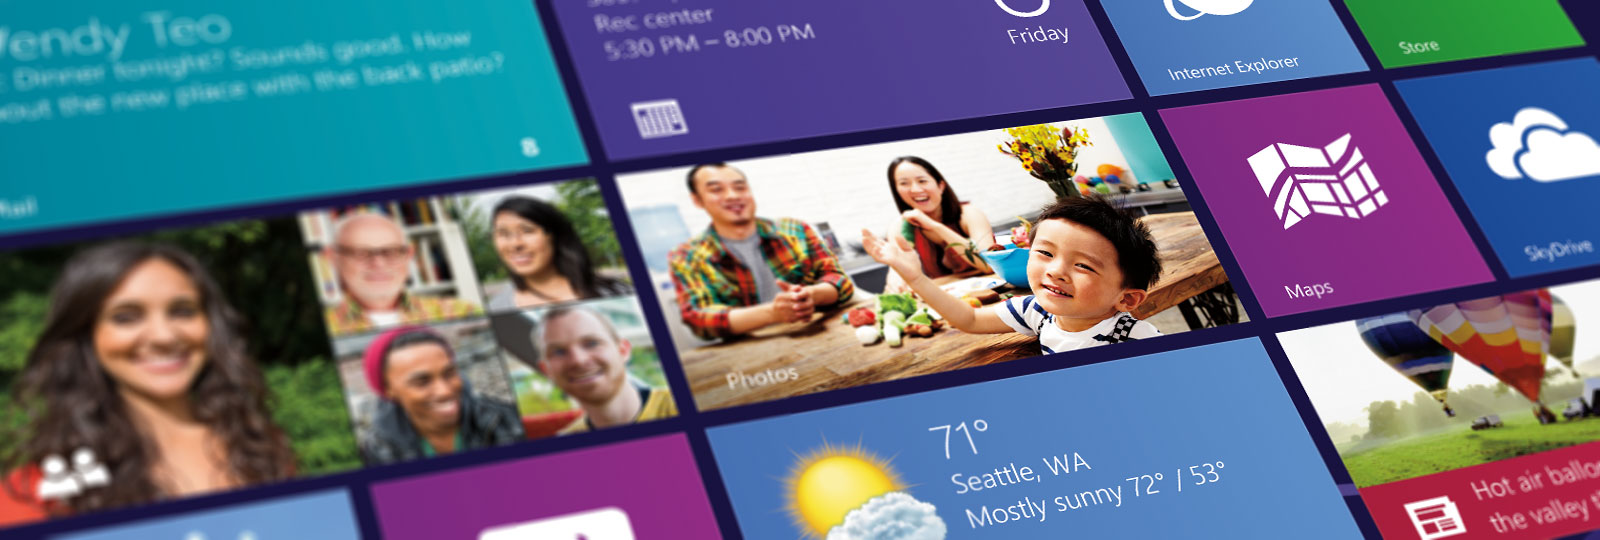 For a limited time, upgrade to Windows 8 Pro at a great price.